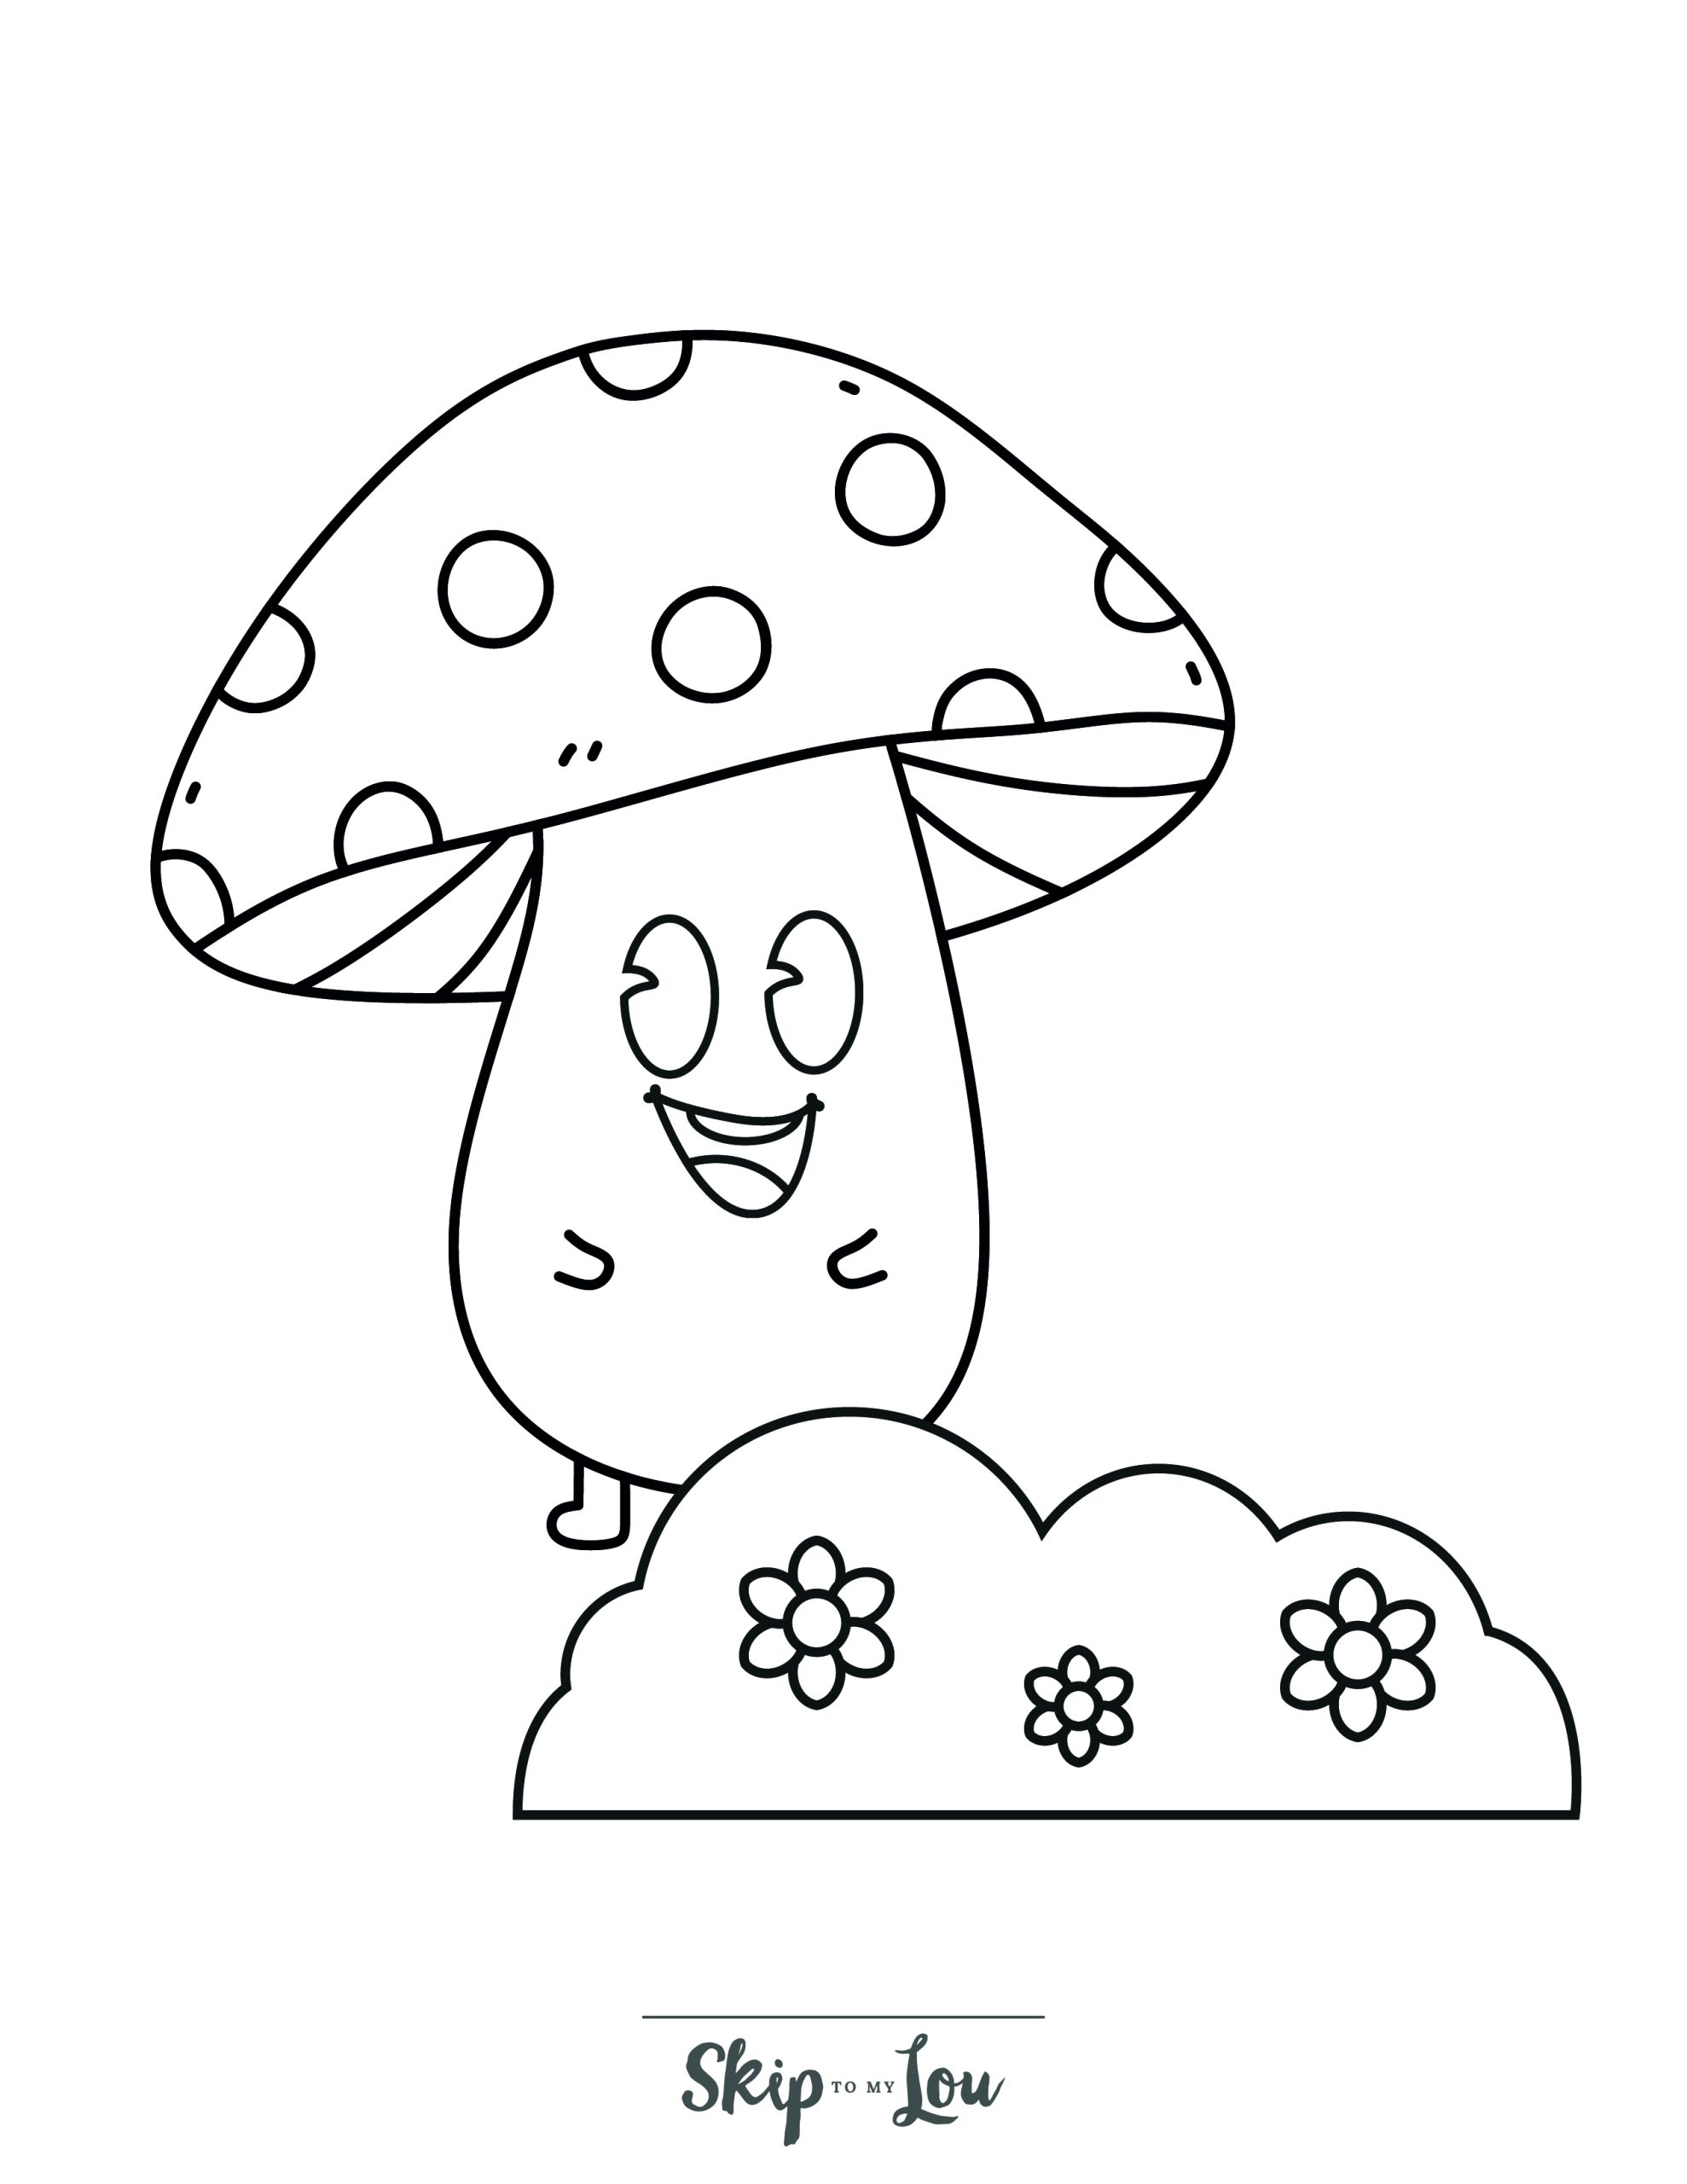 Free mushroom coloring pages